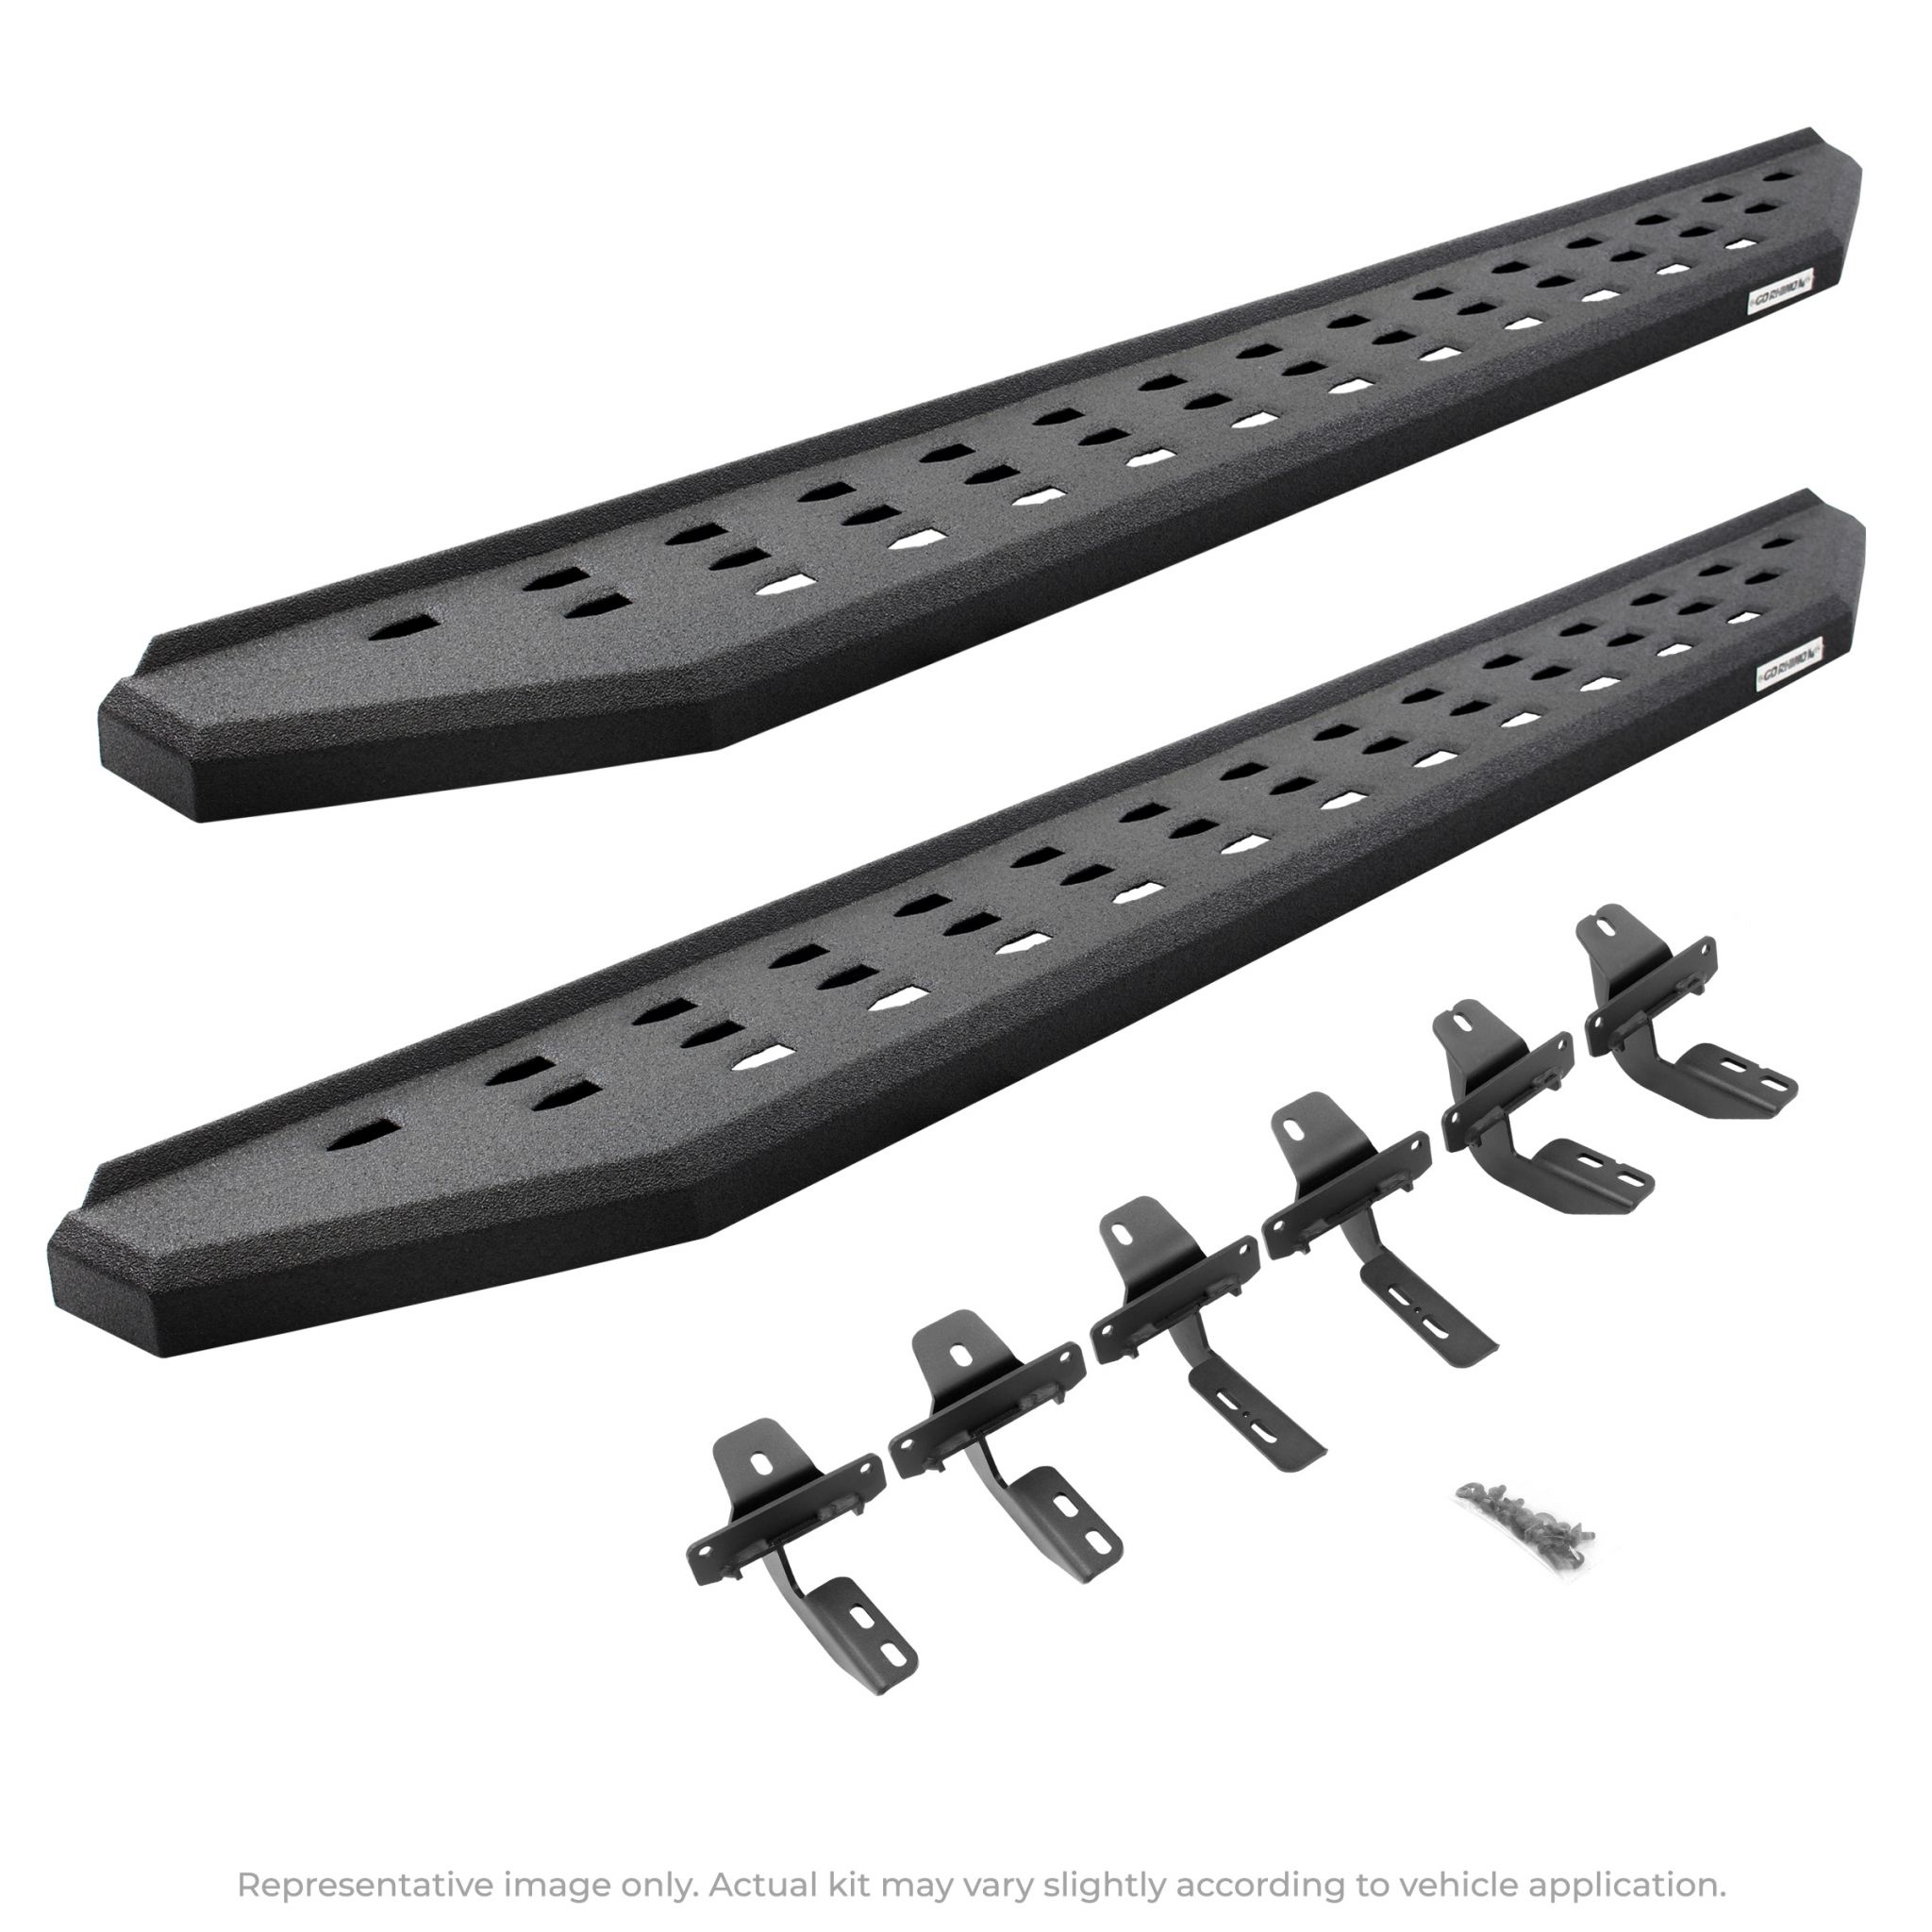 Go Rhino - 69405880T - RB20 Running Boards With Mounting Brackets - Protective Bedliner Coating